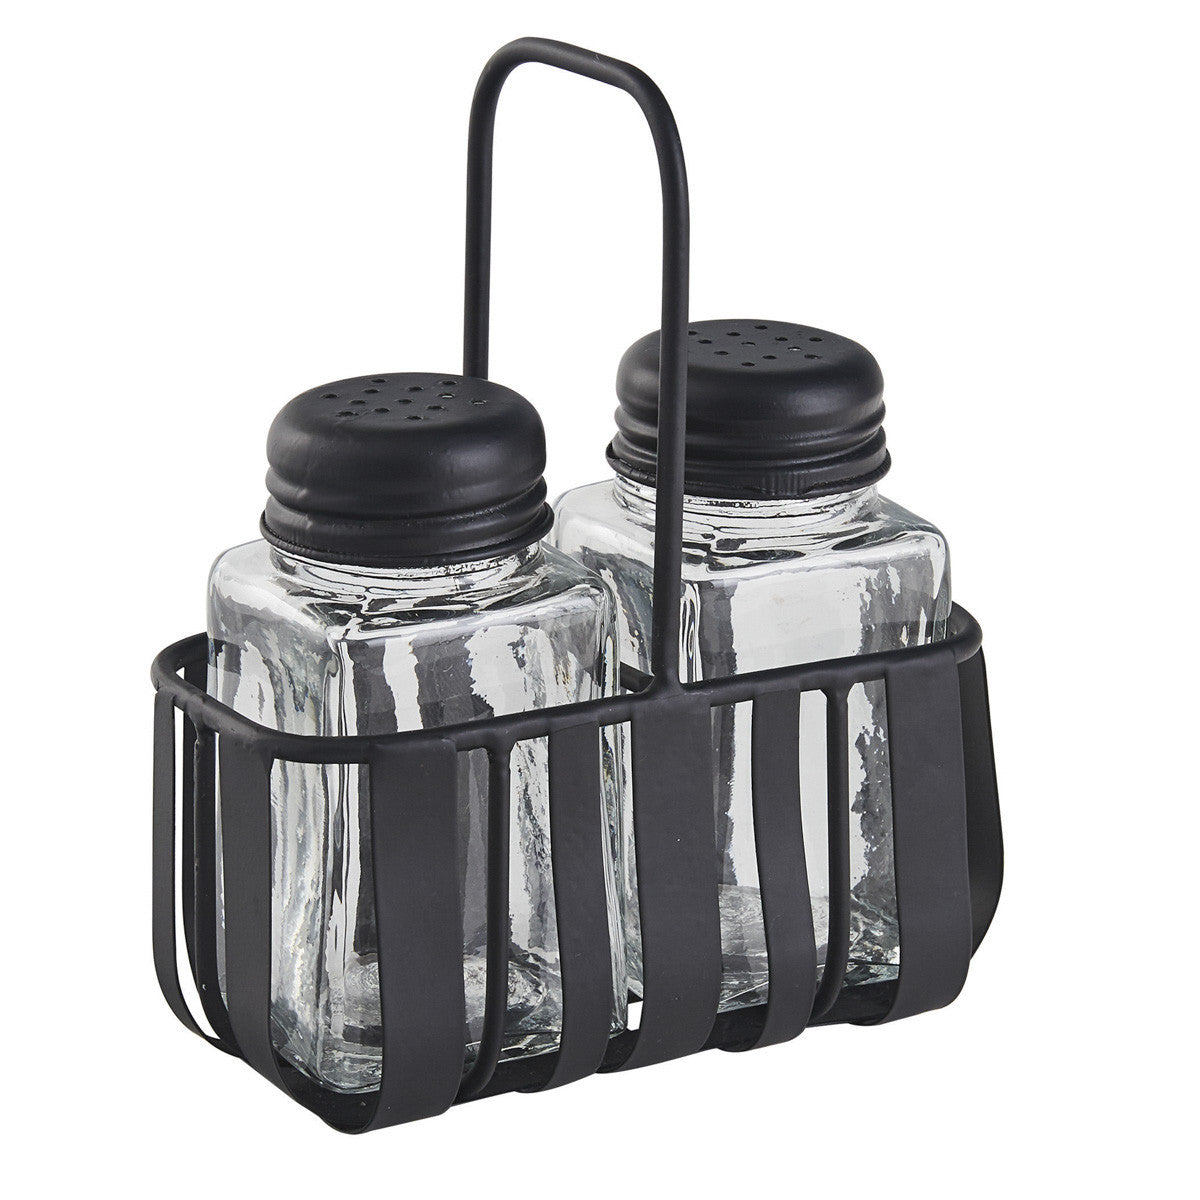 Spencer Caddy with Salt and Pepper Set